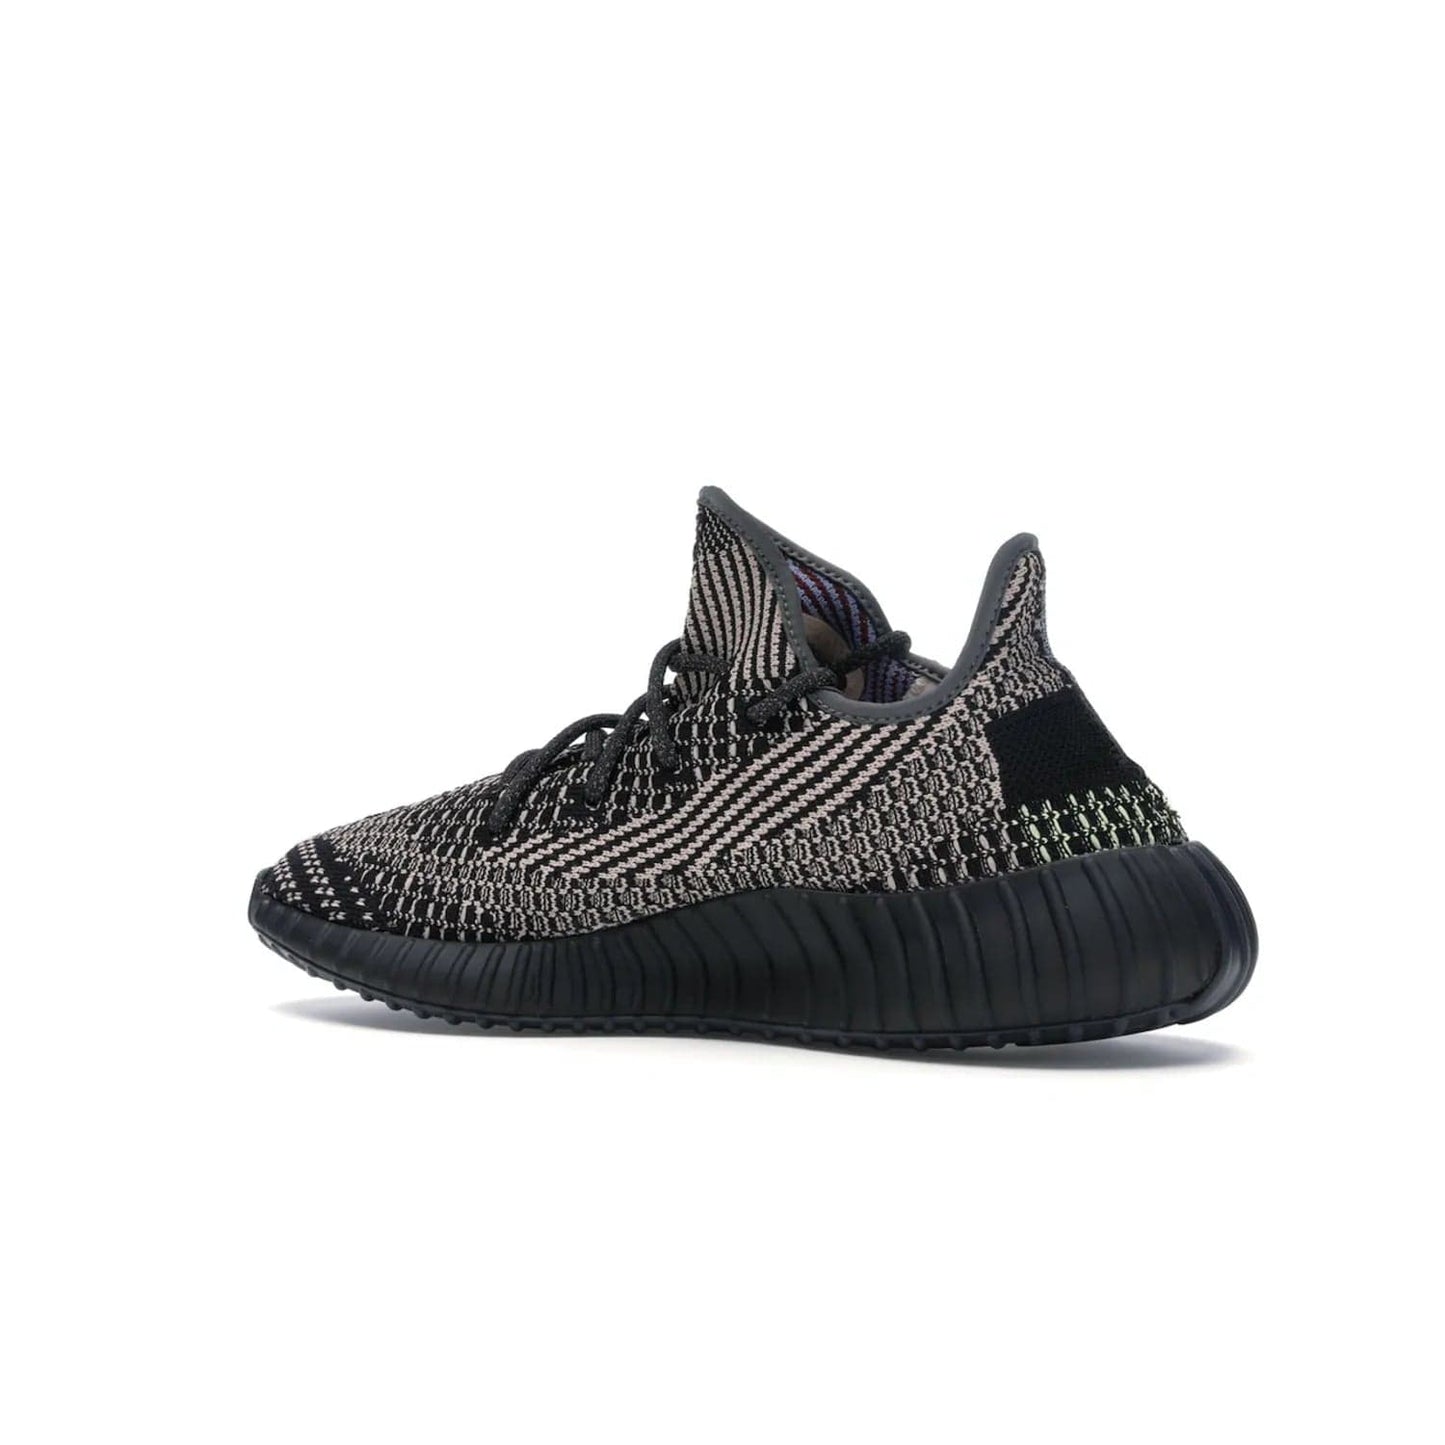 adidas Yeezy Boost 350 V2 Yecheil (Non-Reflective) - Image 22 - Only at www.BallersClubKickz.com - Make a statement with the eye-catching adidas Yeezy Boost 350 V2 Yecheil Non-Reflective. Featuring a spectrum of colorful hues, black upper, Boost cushioning, and black side stripe, the sneaker brings a luxe yet playful finish to any outfit.